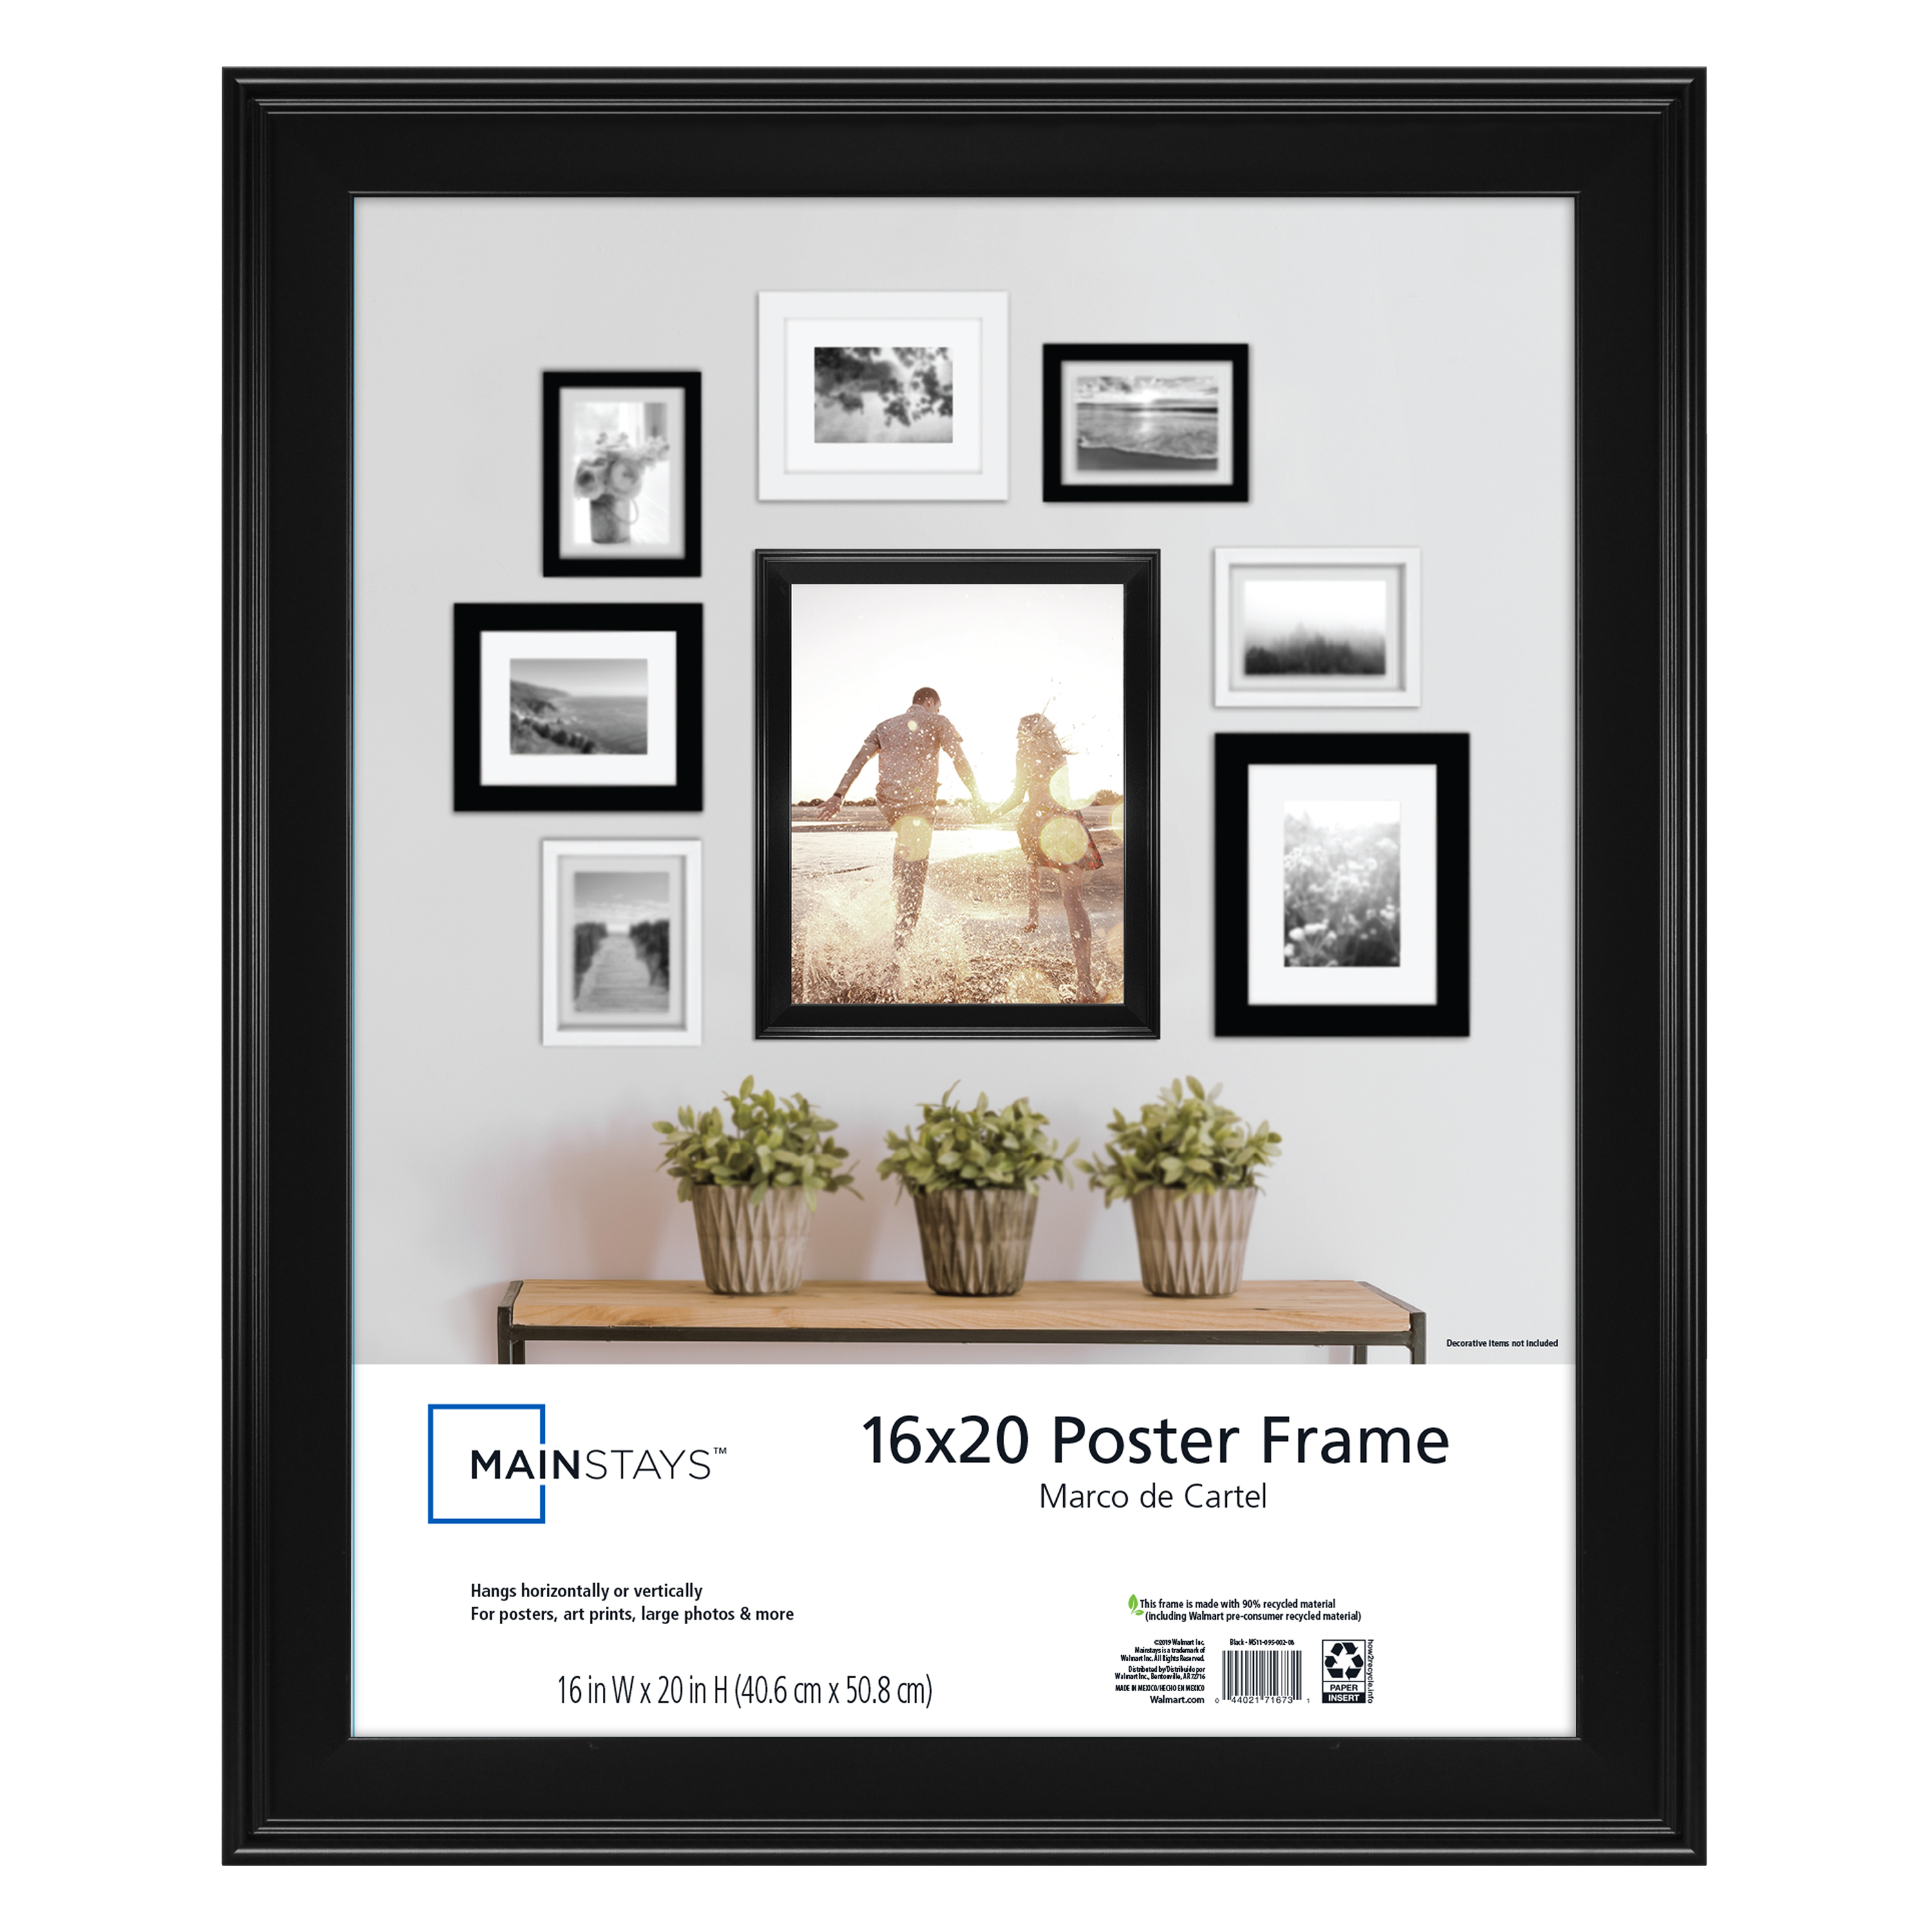 Mainstays 16x20 Casual Poster and Picture Frame, Black - image 1 of 5